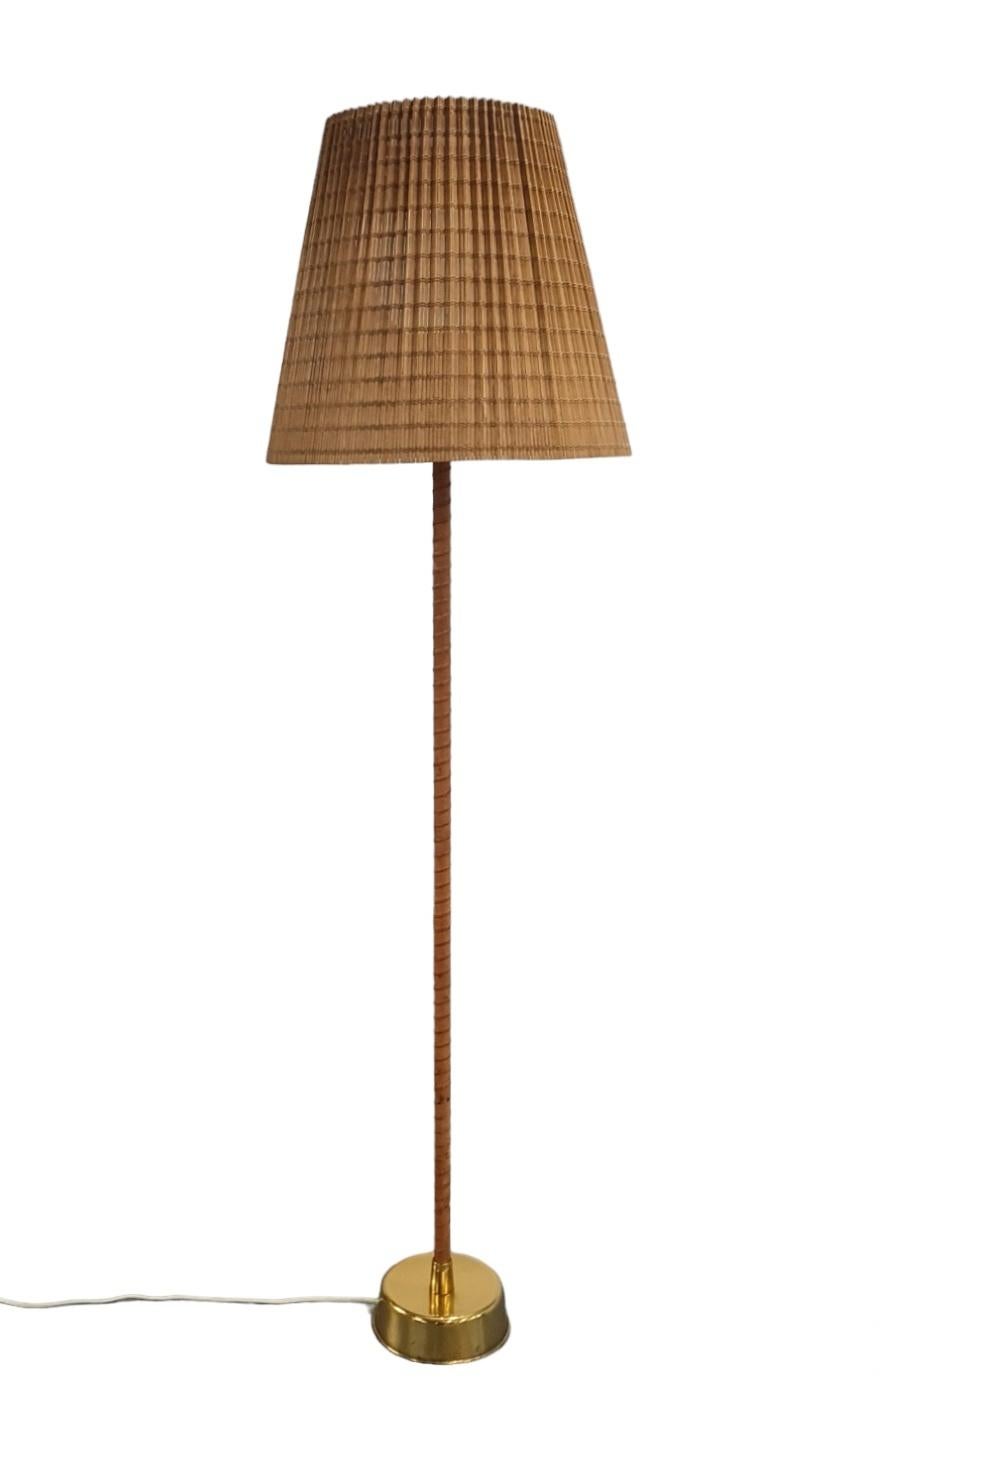 This `Ihanne' lamp became very popular in Finland with many different variations of stems, materials and shades. It was used in public buildings as well as private homes. The long reigning president Urho Kekkonen had the table version of this lamp